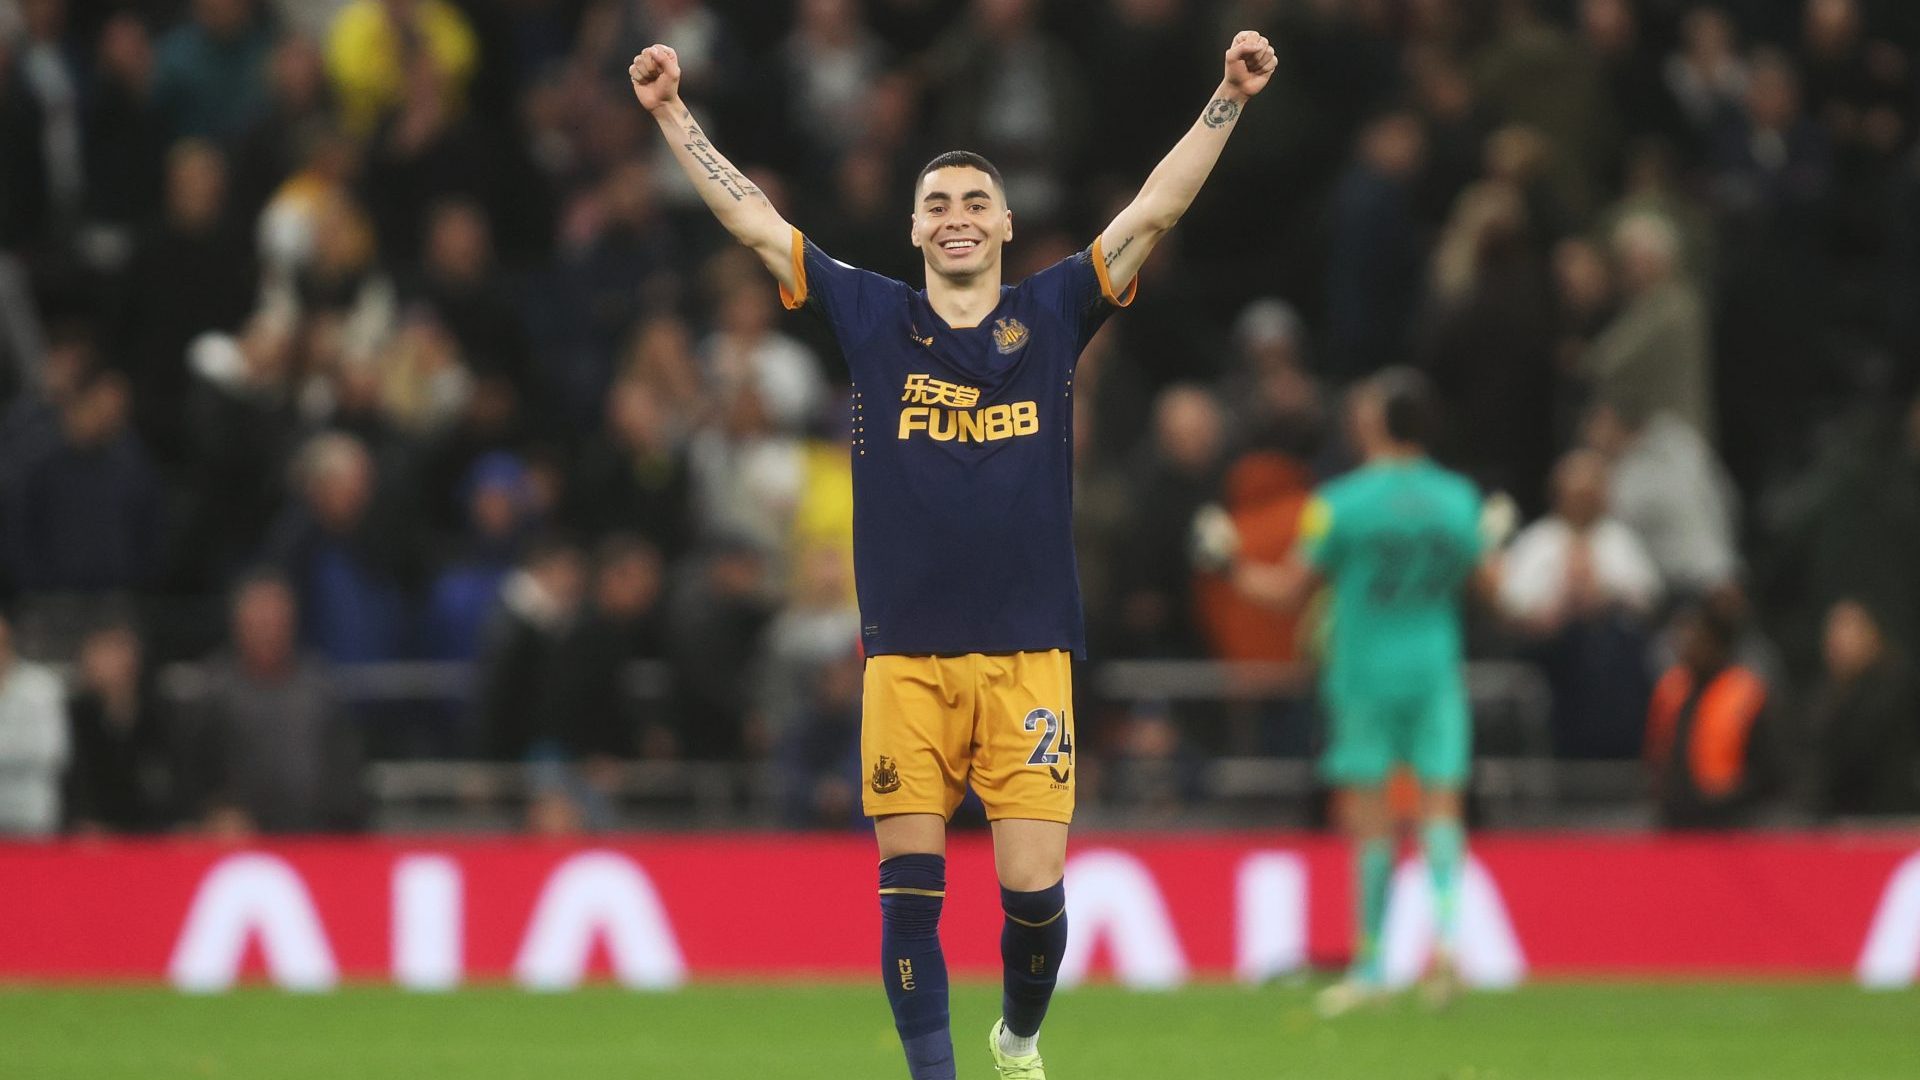 Newcastle United’s Miguel Almirón celebrates his side’s 
victory over Tottenham 
Hotspur on Sunday. Photo: Julian Finney/Getty